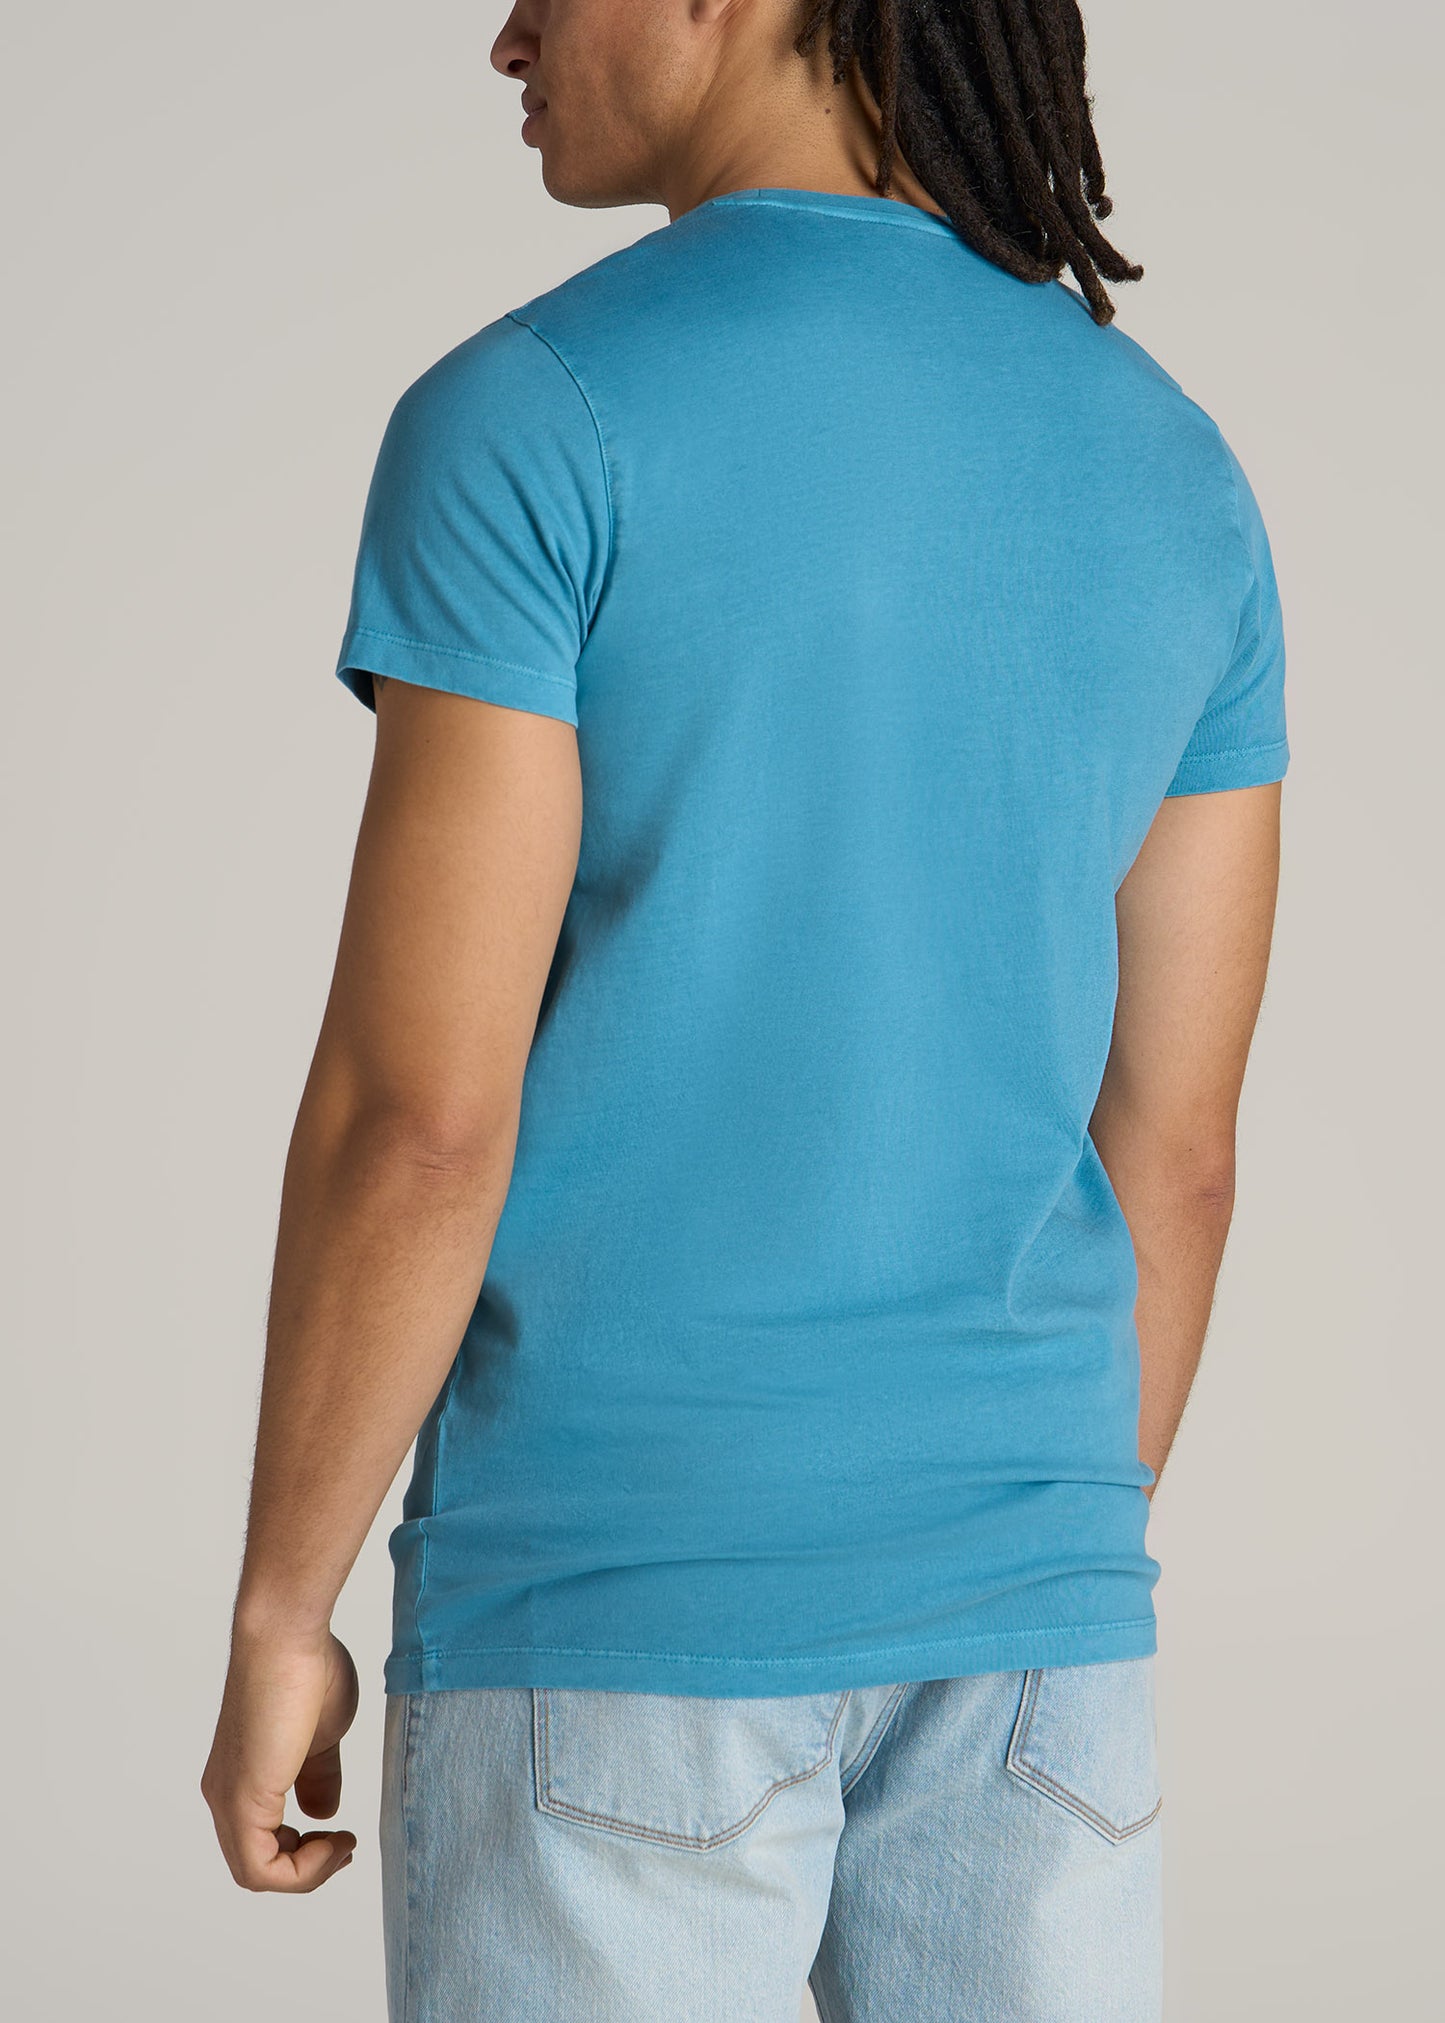 MODERN-FIT Garment Dyed Cotton Men's Tall T-Shirt in Turquoise Splash